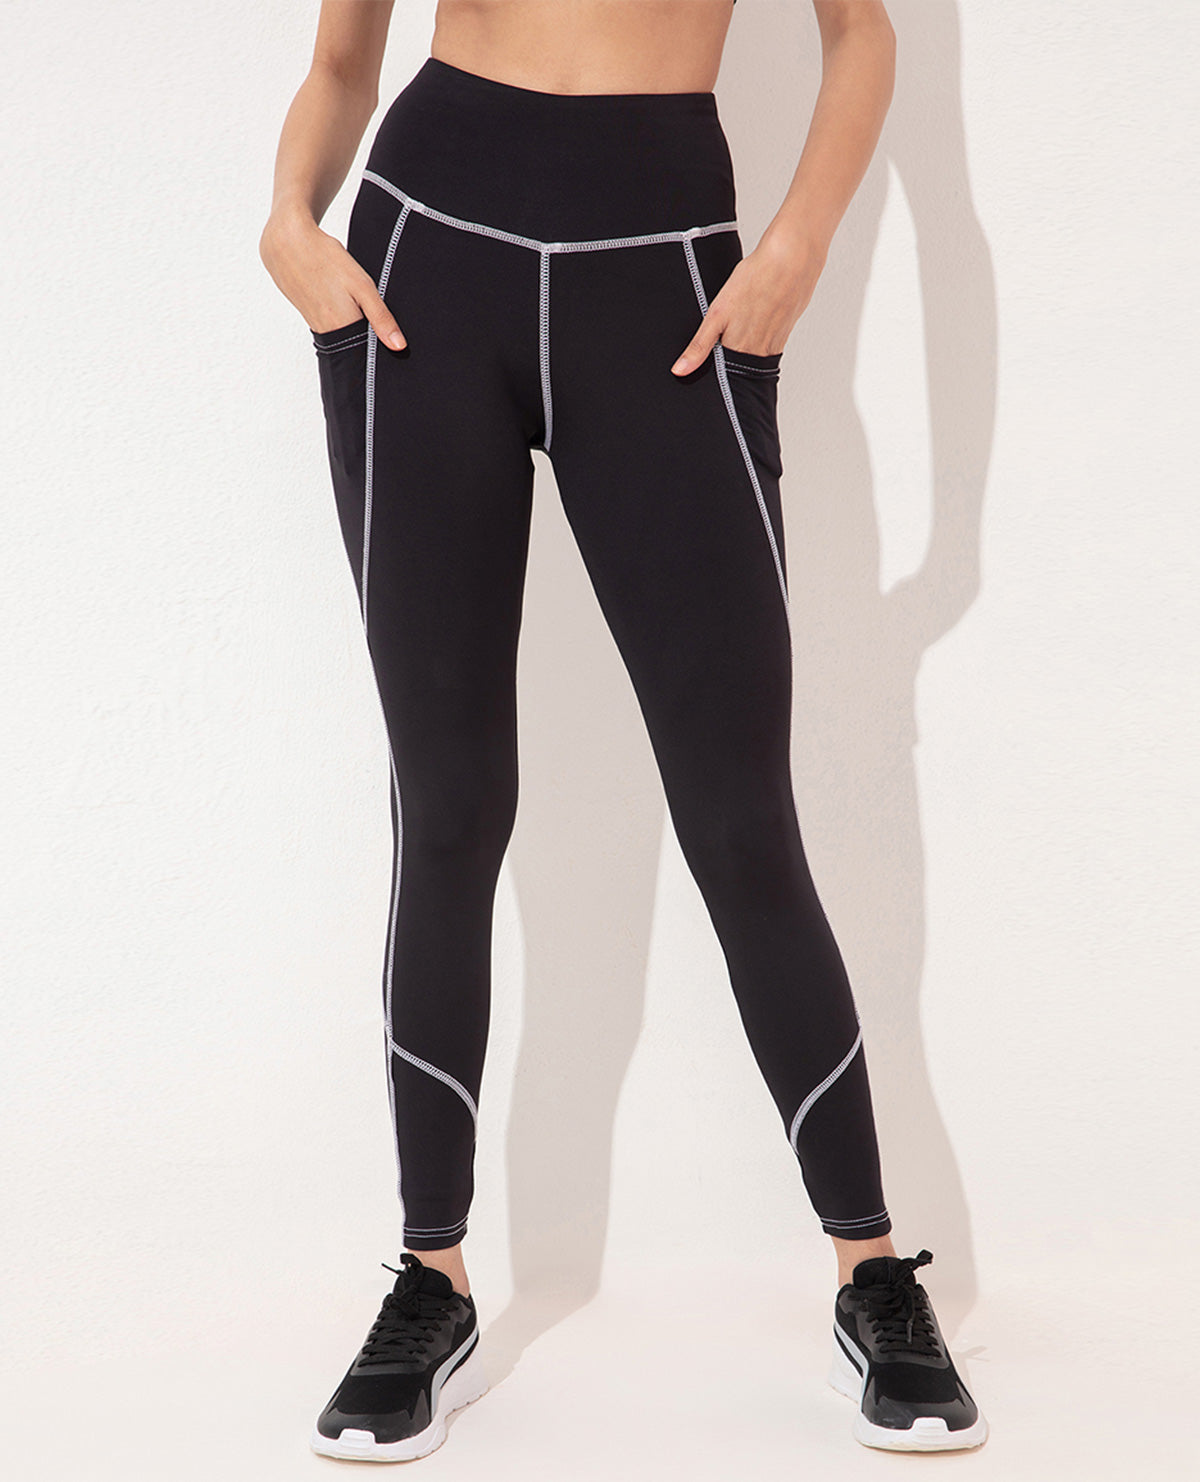 Xiaoqing classmate Gym Sets for Women 2 Piece Seamless workout set Long  Sleeve Top and High Waist Scrunch Leggings Yoga Outfits (Black - ShopStyle